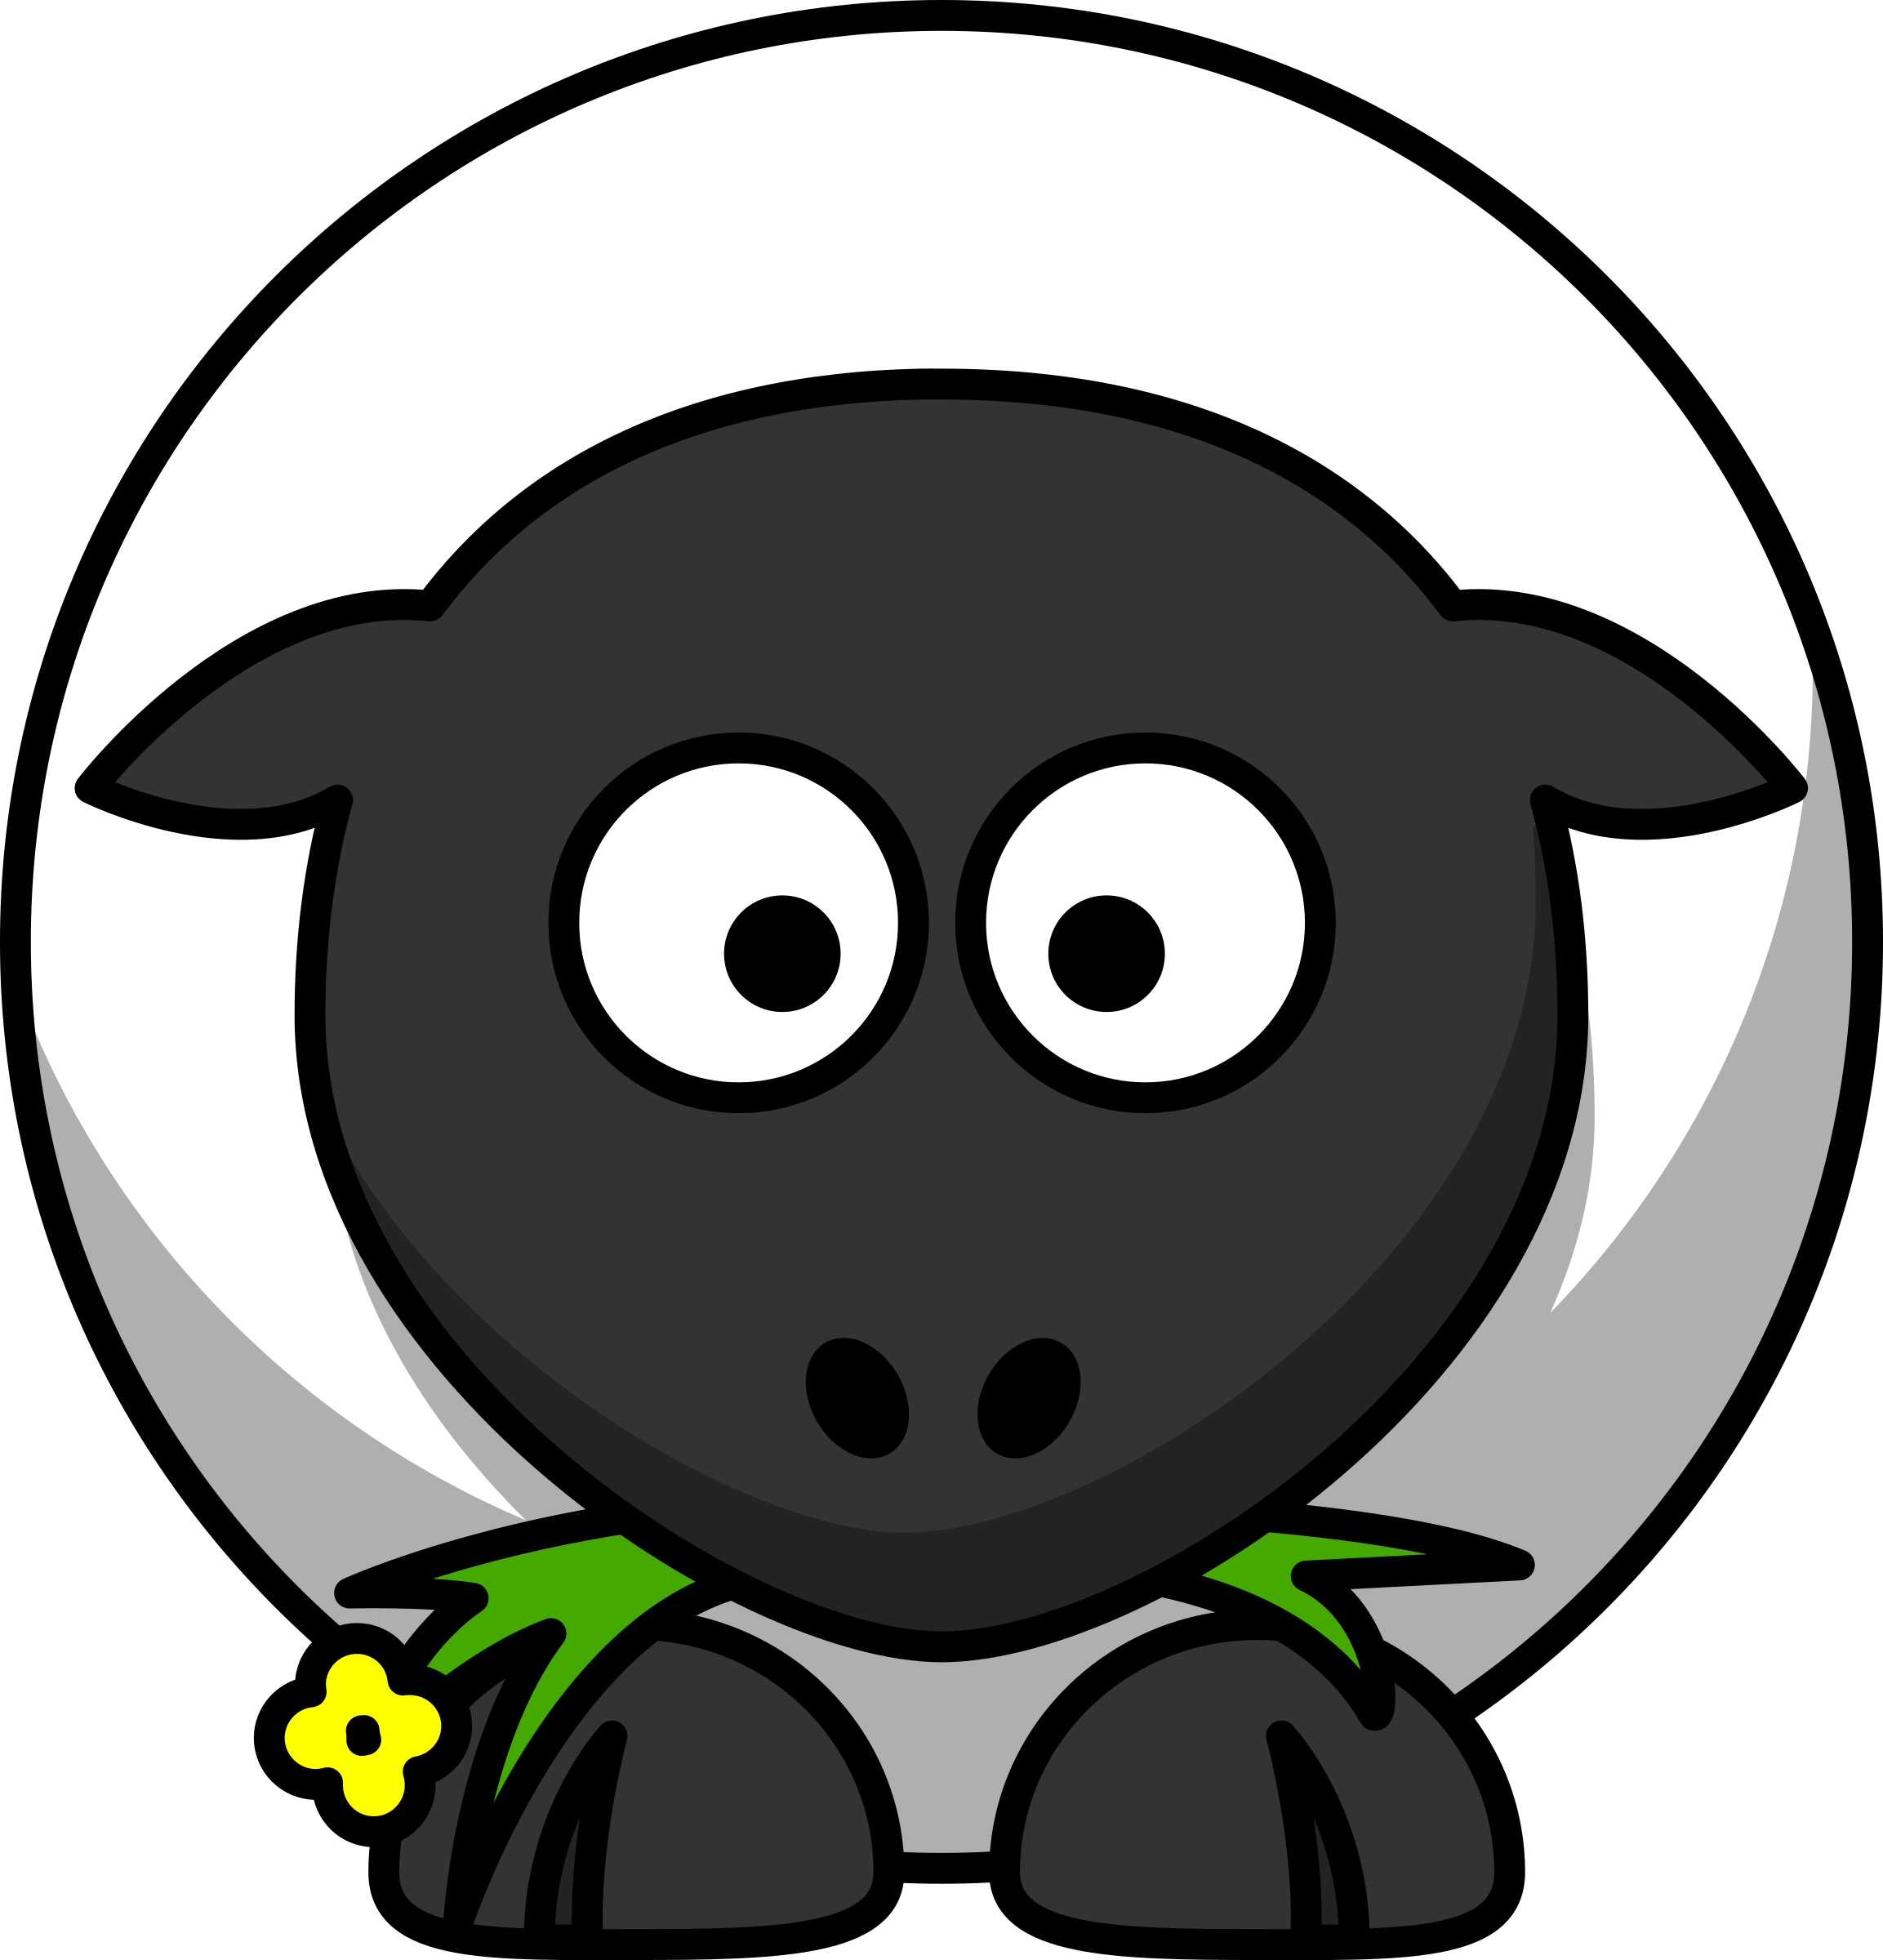 Cartoon sheep Icons PNG - Free PNG and Icons Downloads